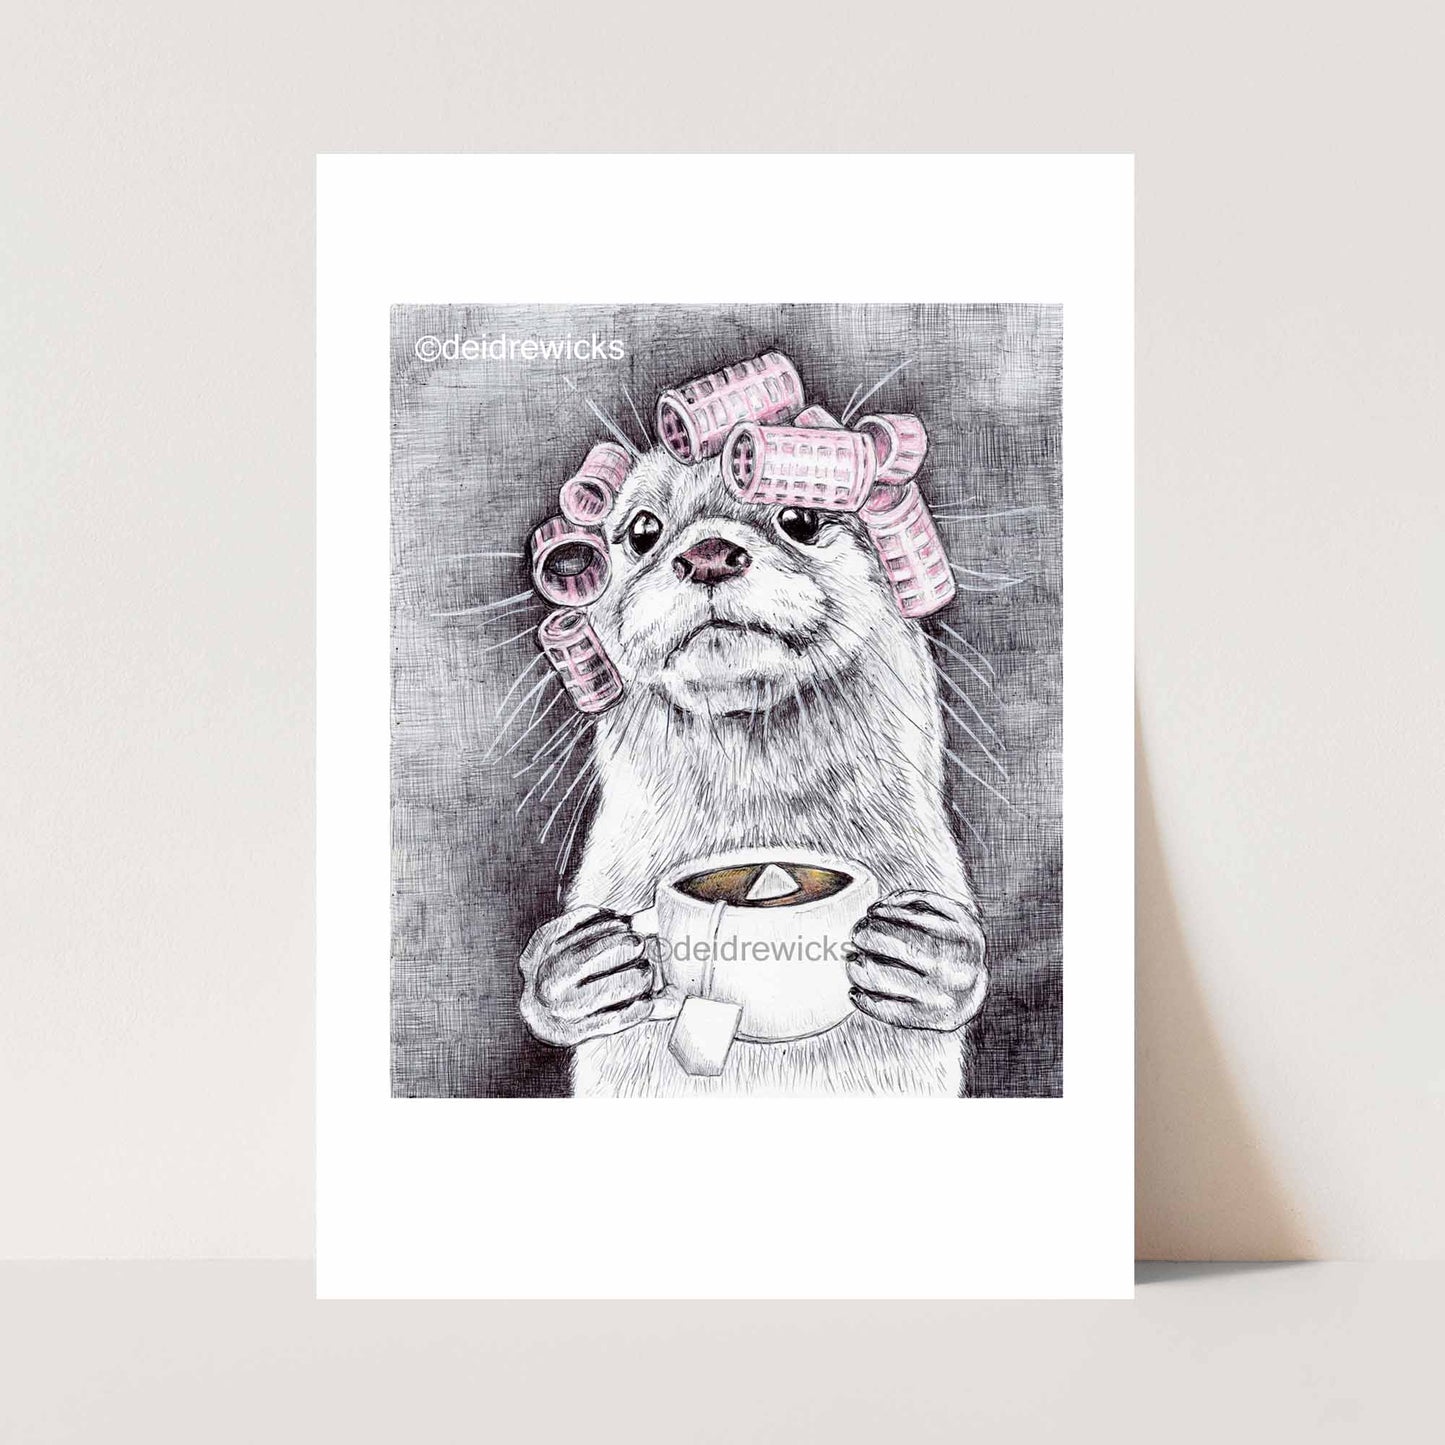 Otter drinking tea ballpoint pen ink drawing without a funny saying. Art by Deidre Wicks